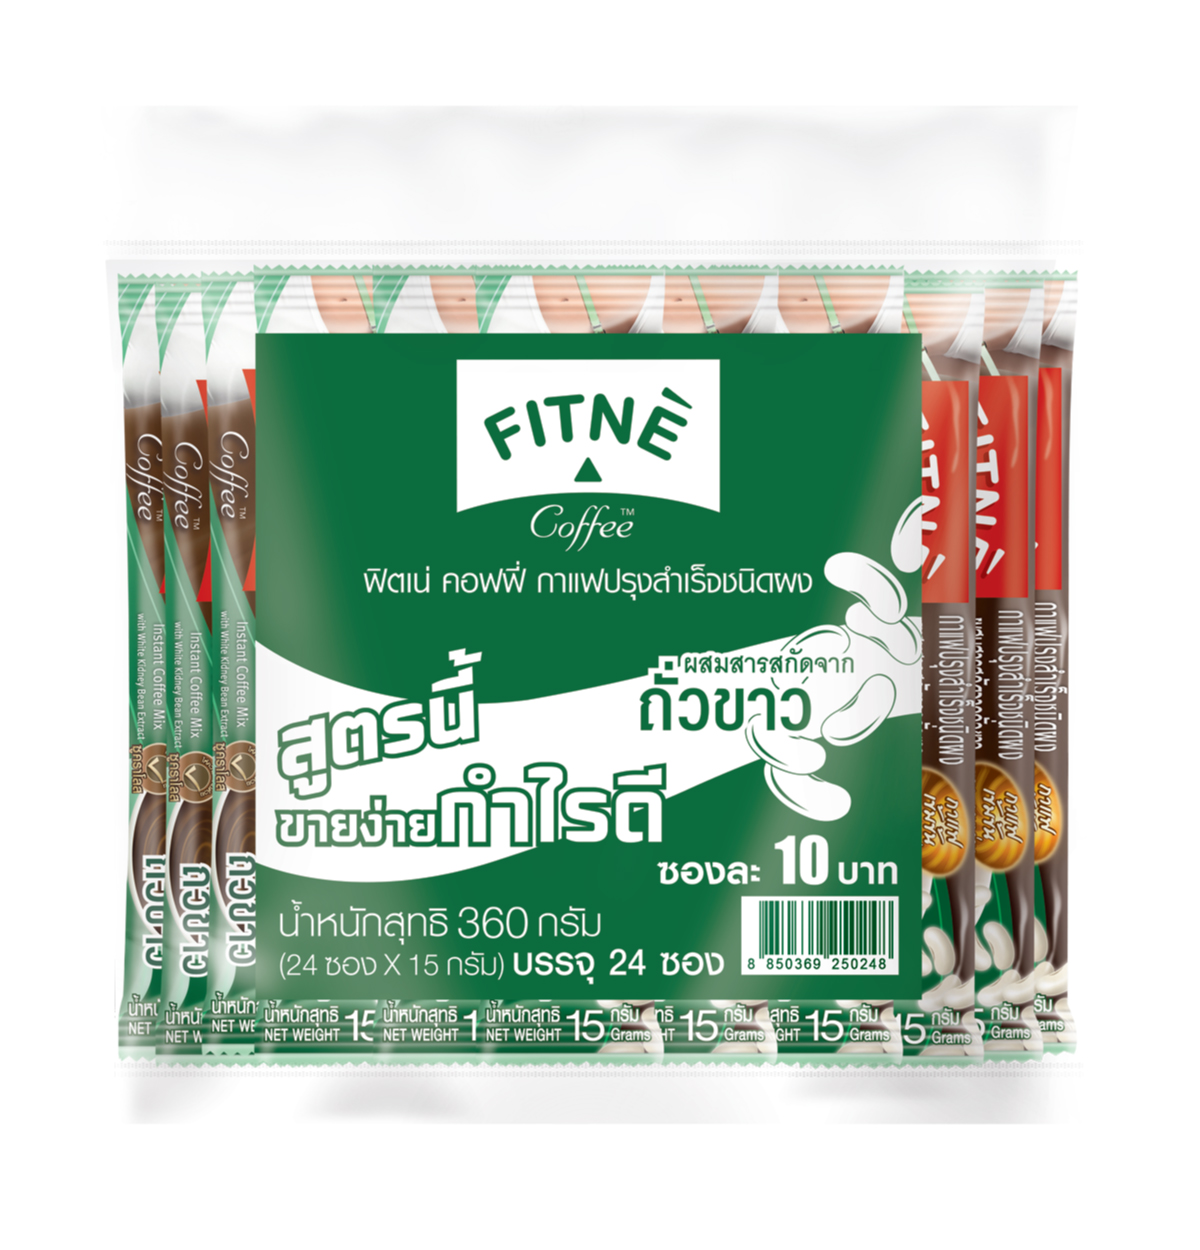 FITNE' Coffee Instant Coffee Mix with White Kidney Bean Extract 15g.x24 Sticks